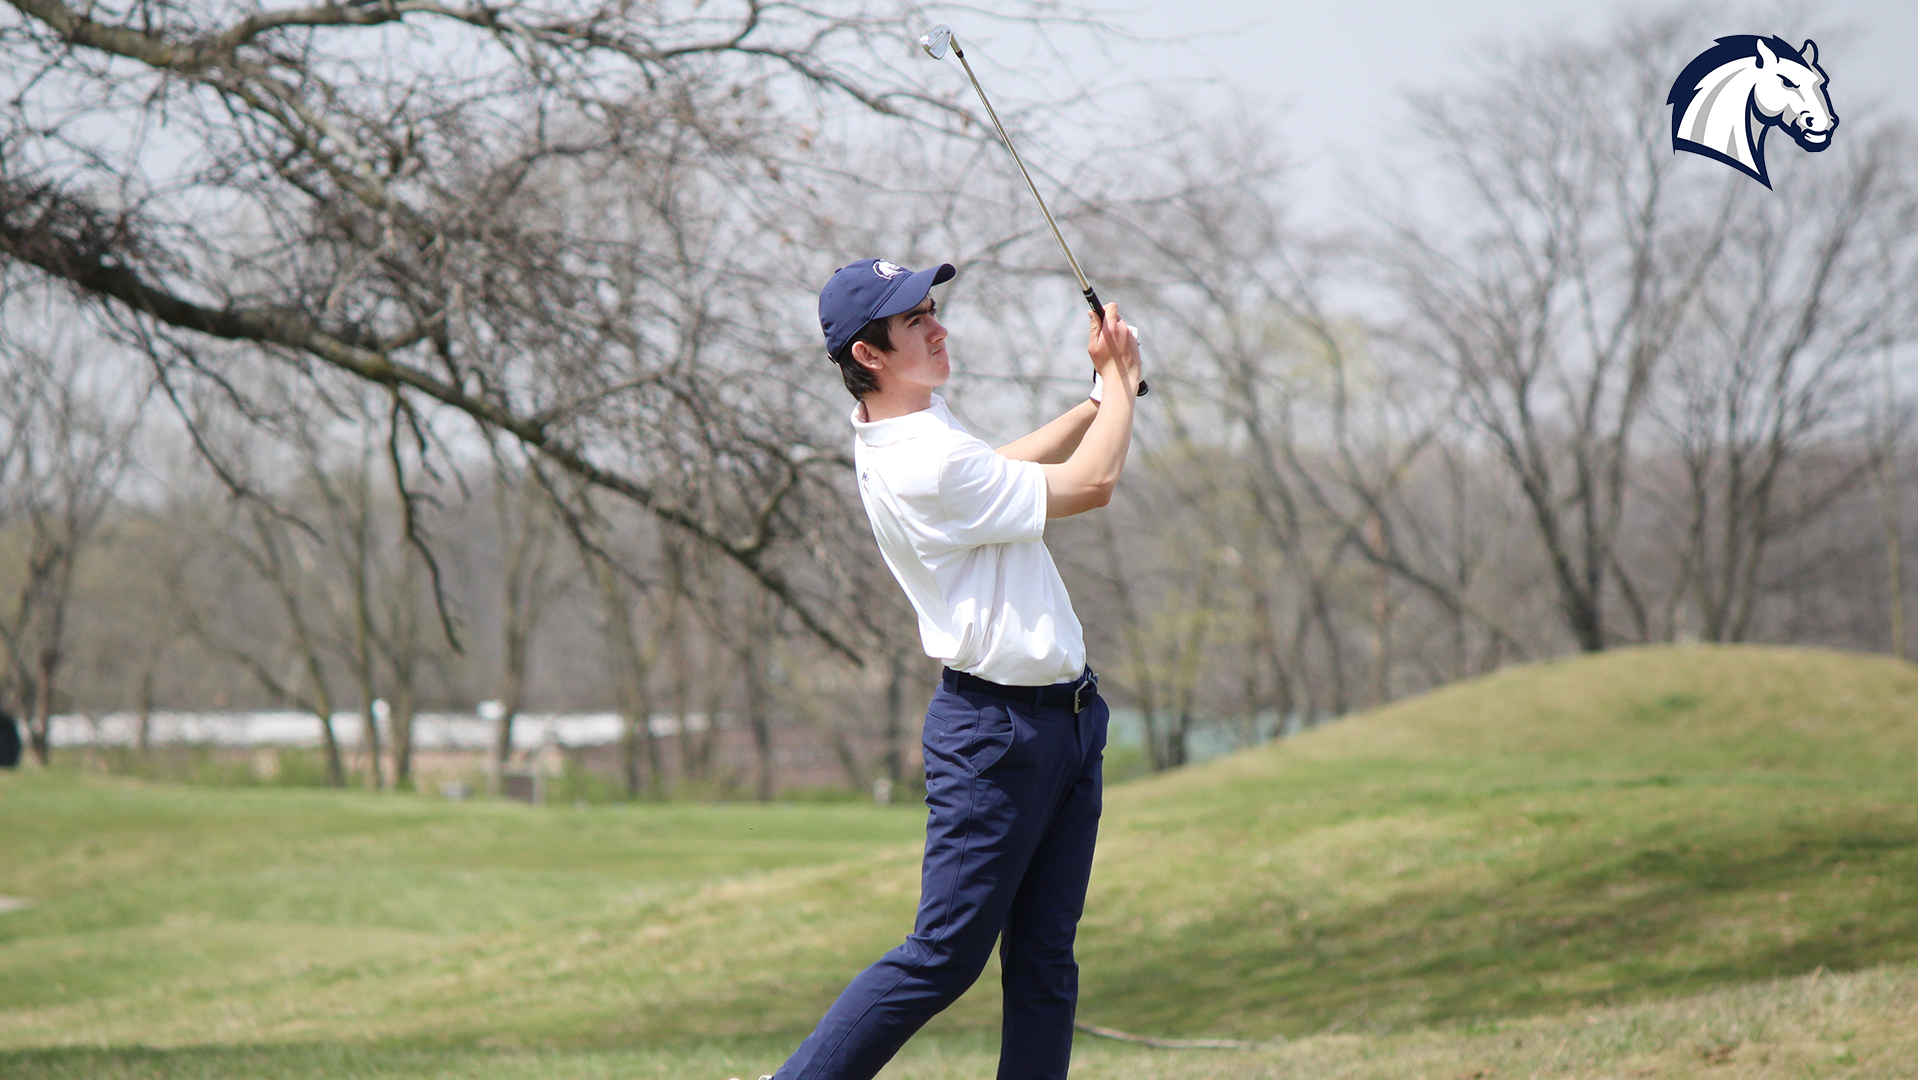 Chargers rally to post top 10 finish at Ken Partridge Invite